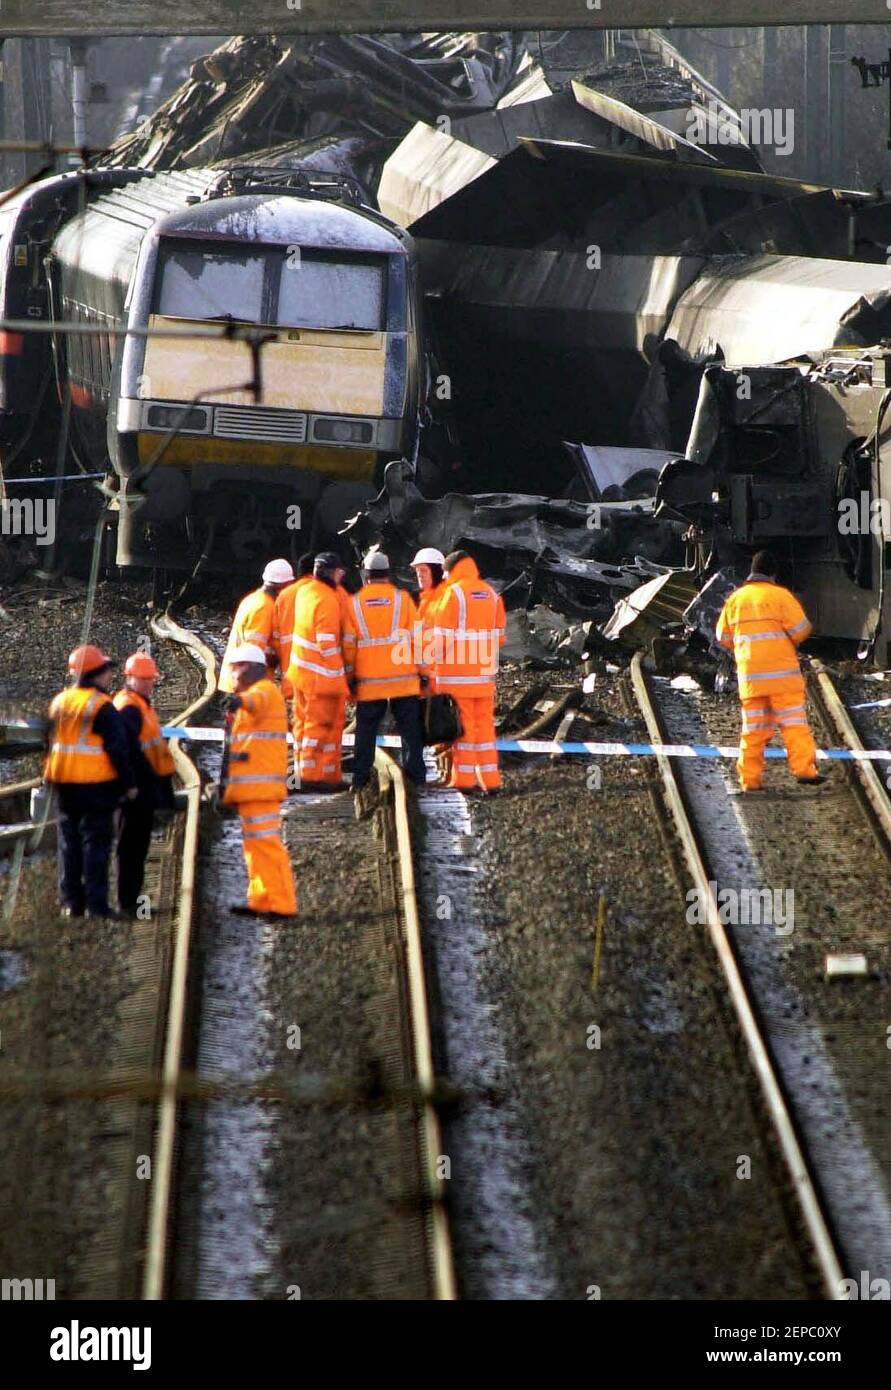 File photo dated 01/03/01 of rail officials inspecting the site of the horrific train crash in Selby North Yorks, where two train drivers, two others GNER staff and six passengers died on February 28 2001, after the Newcastle to London passenger service struck a Land Rover which had careered off the M62 motorway and crashed onto the track. Stock Photo